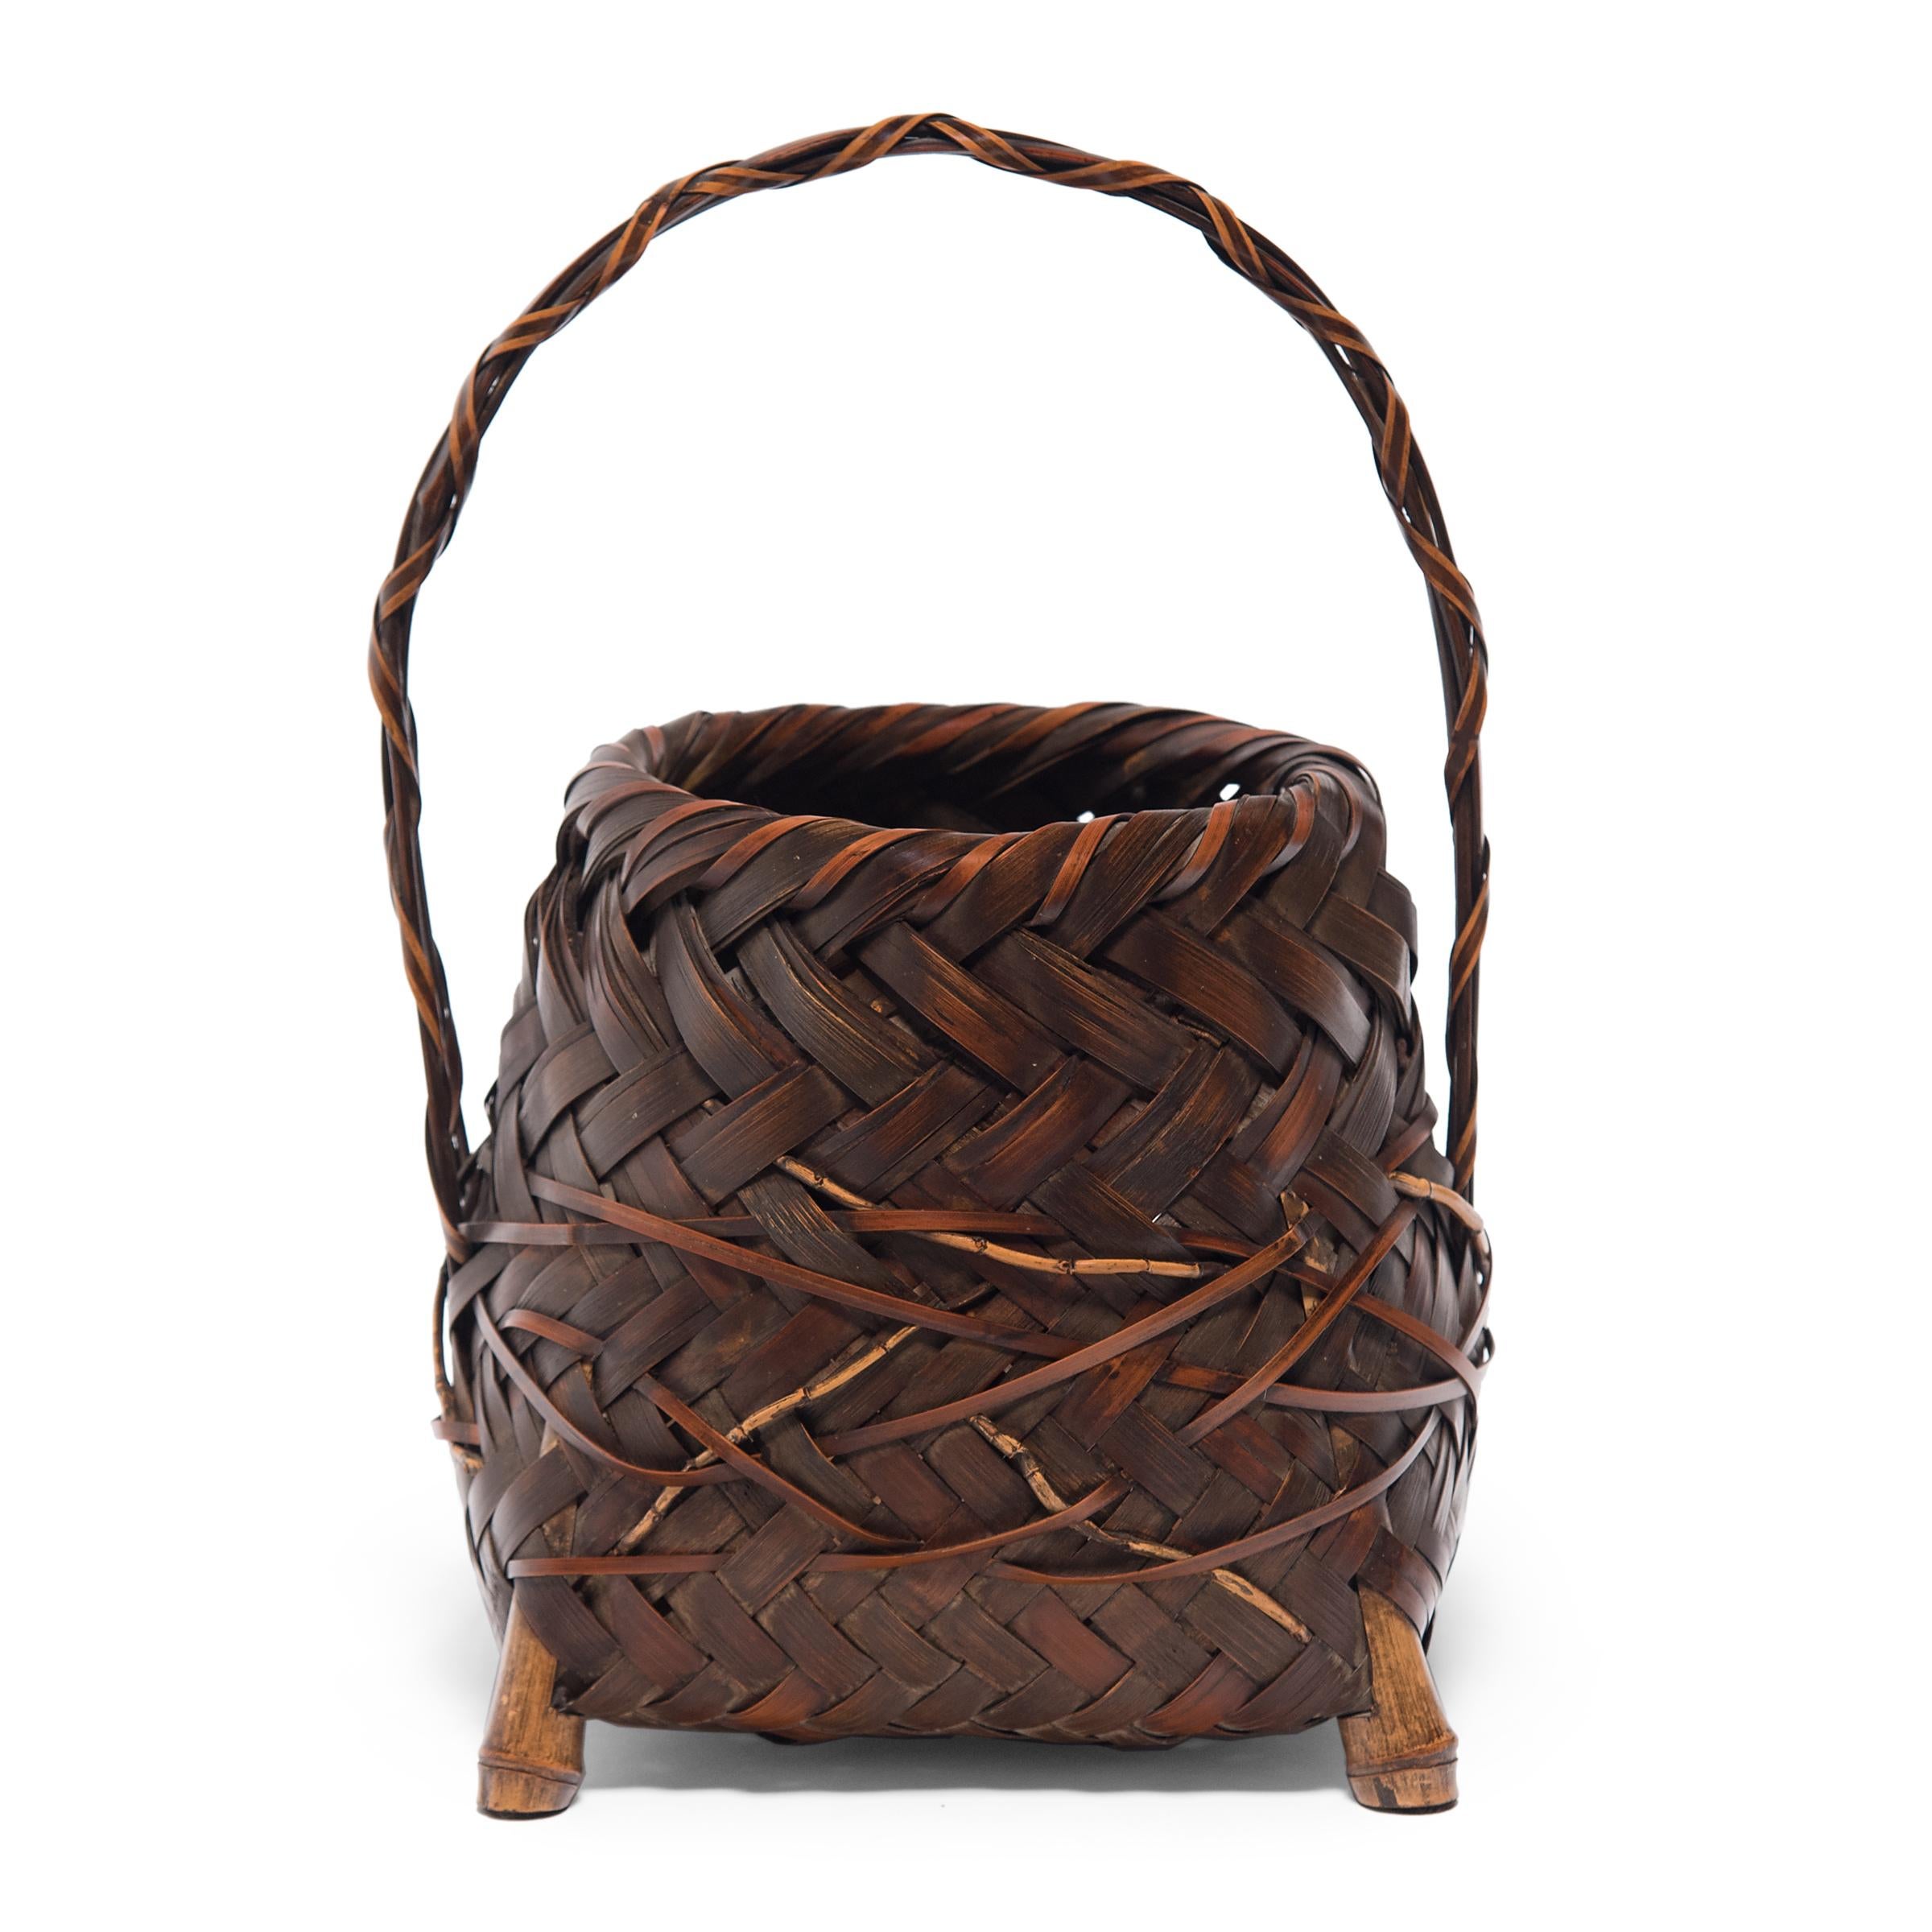 This one-of-a-kind bamboo basket is a late-Meiji era flower basket (hanakago) designed especially for ikebana, the Japanese art of floral arrangement. The basket has a trapezoidal form that tapers to a round opening and is surmounted by a high,